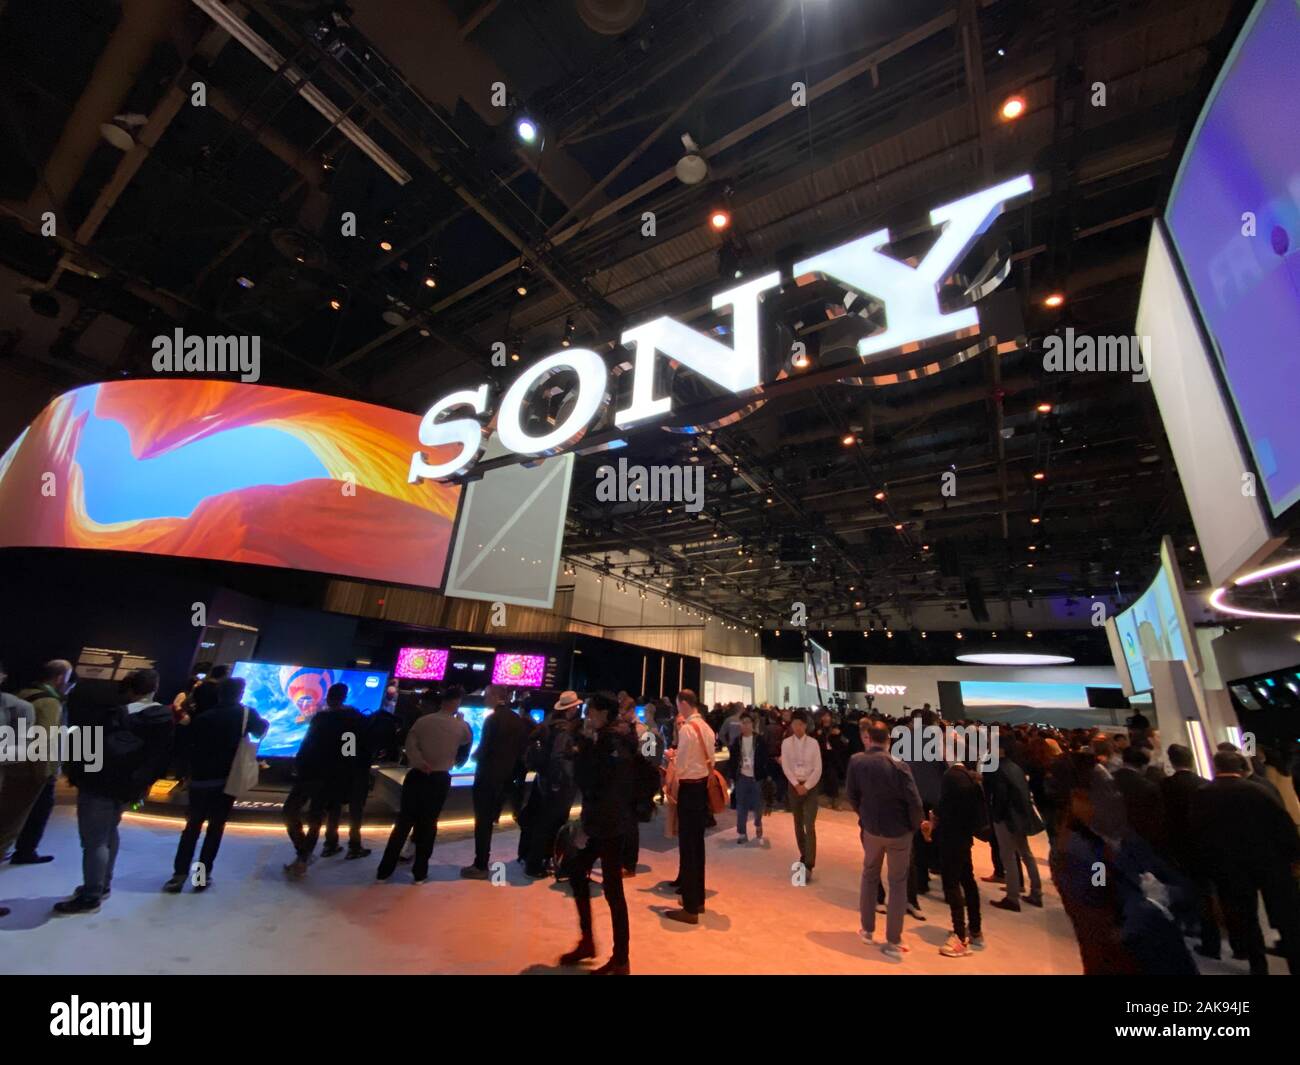 The Sony stand inside the Consumer Electronics Show (CES), the annual technology trade show being held at the Las Vegas Convention Center, Nevada, in the United States. Stock Photo